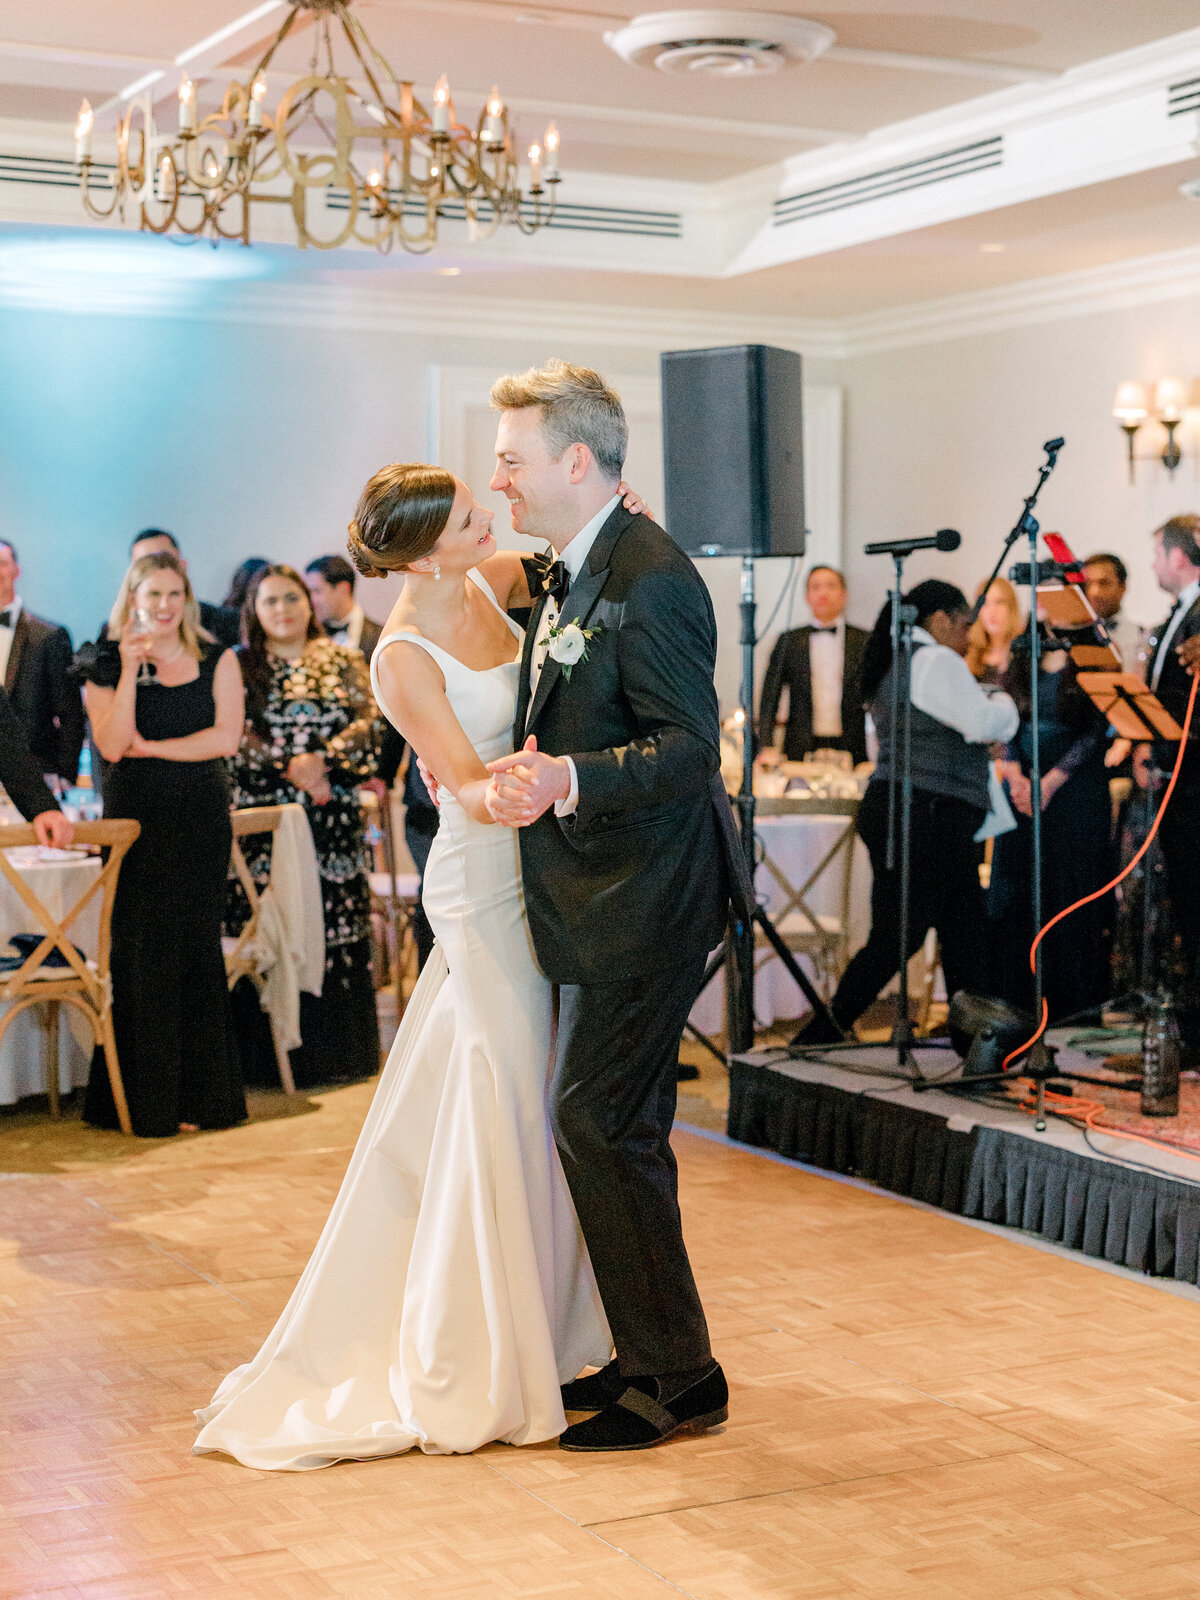 Bride and groom dancing in front of the band on stage while their wedding guests watch